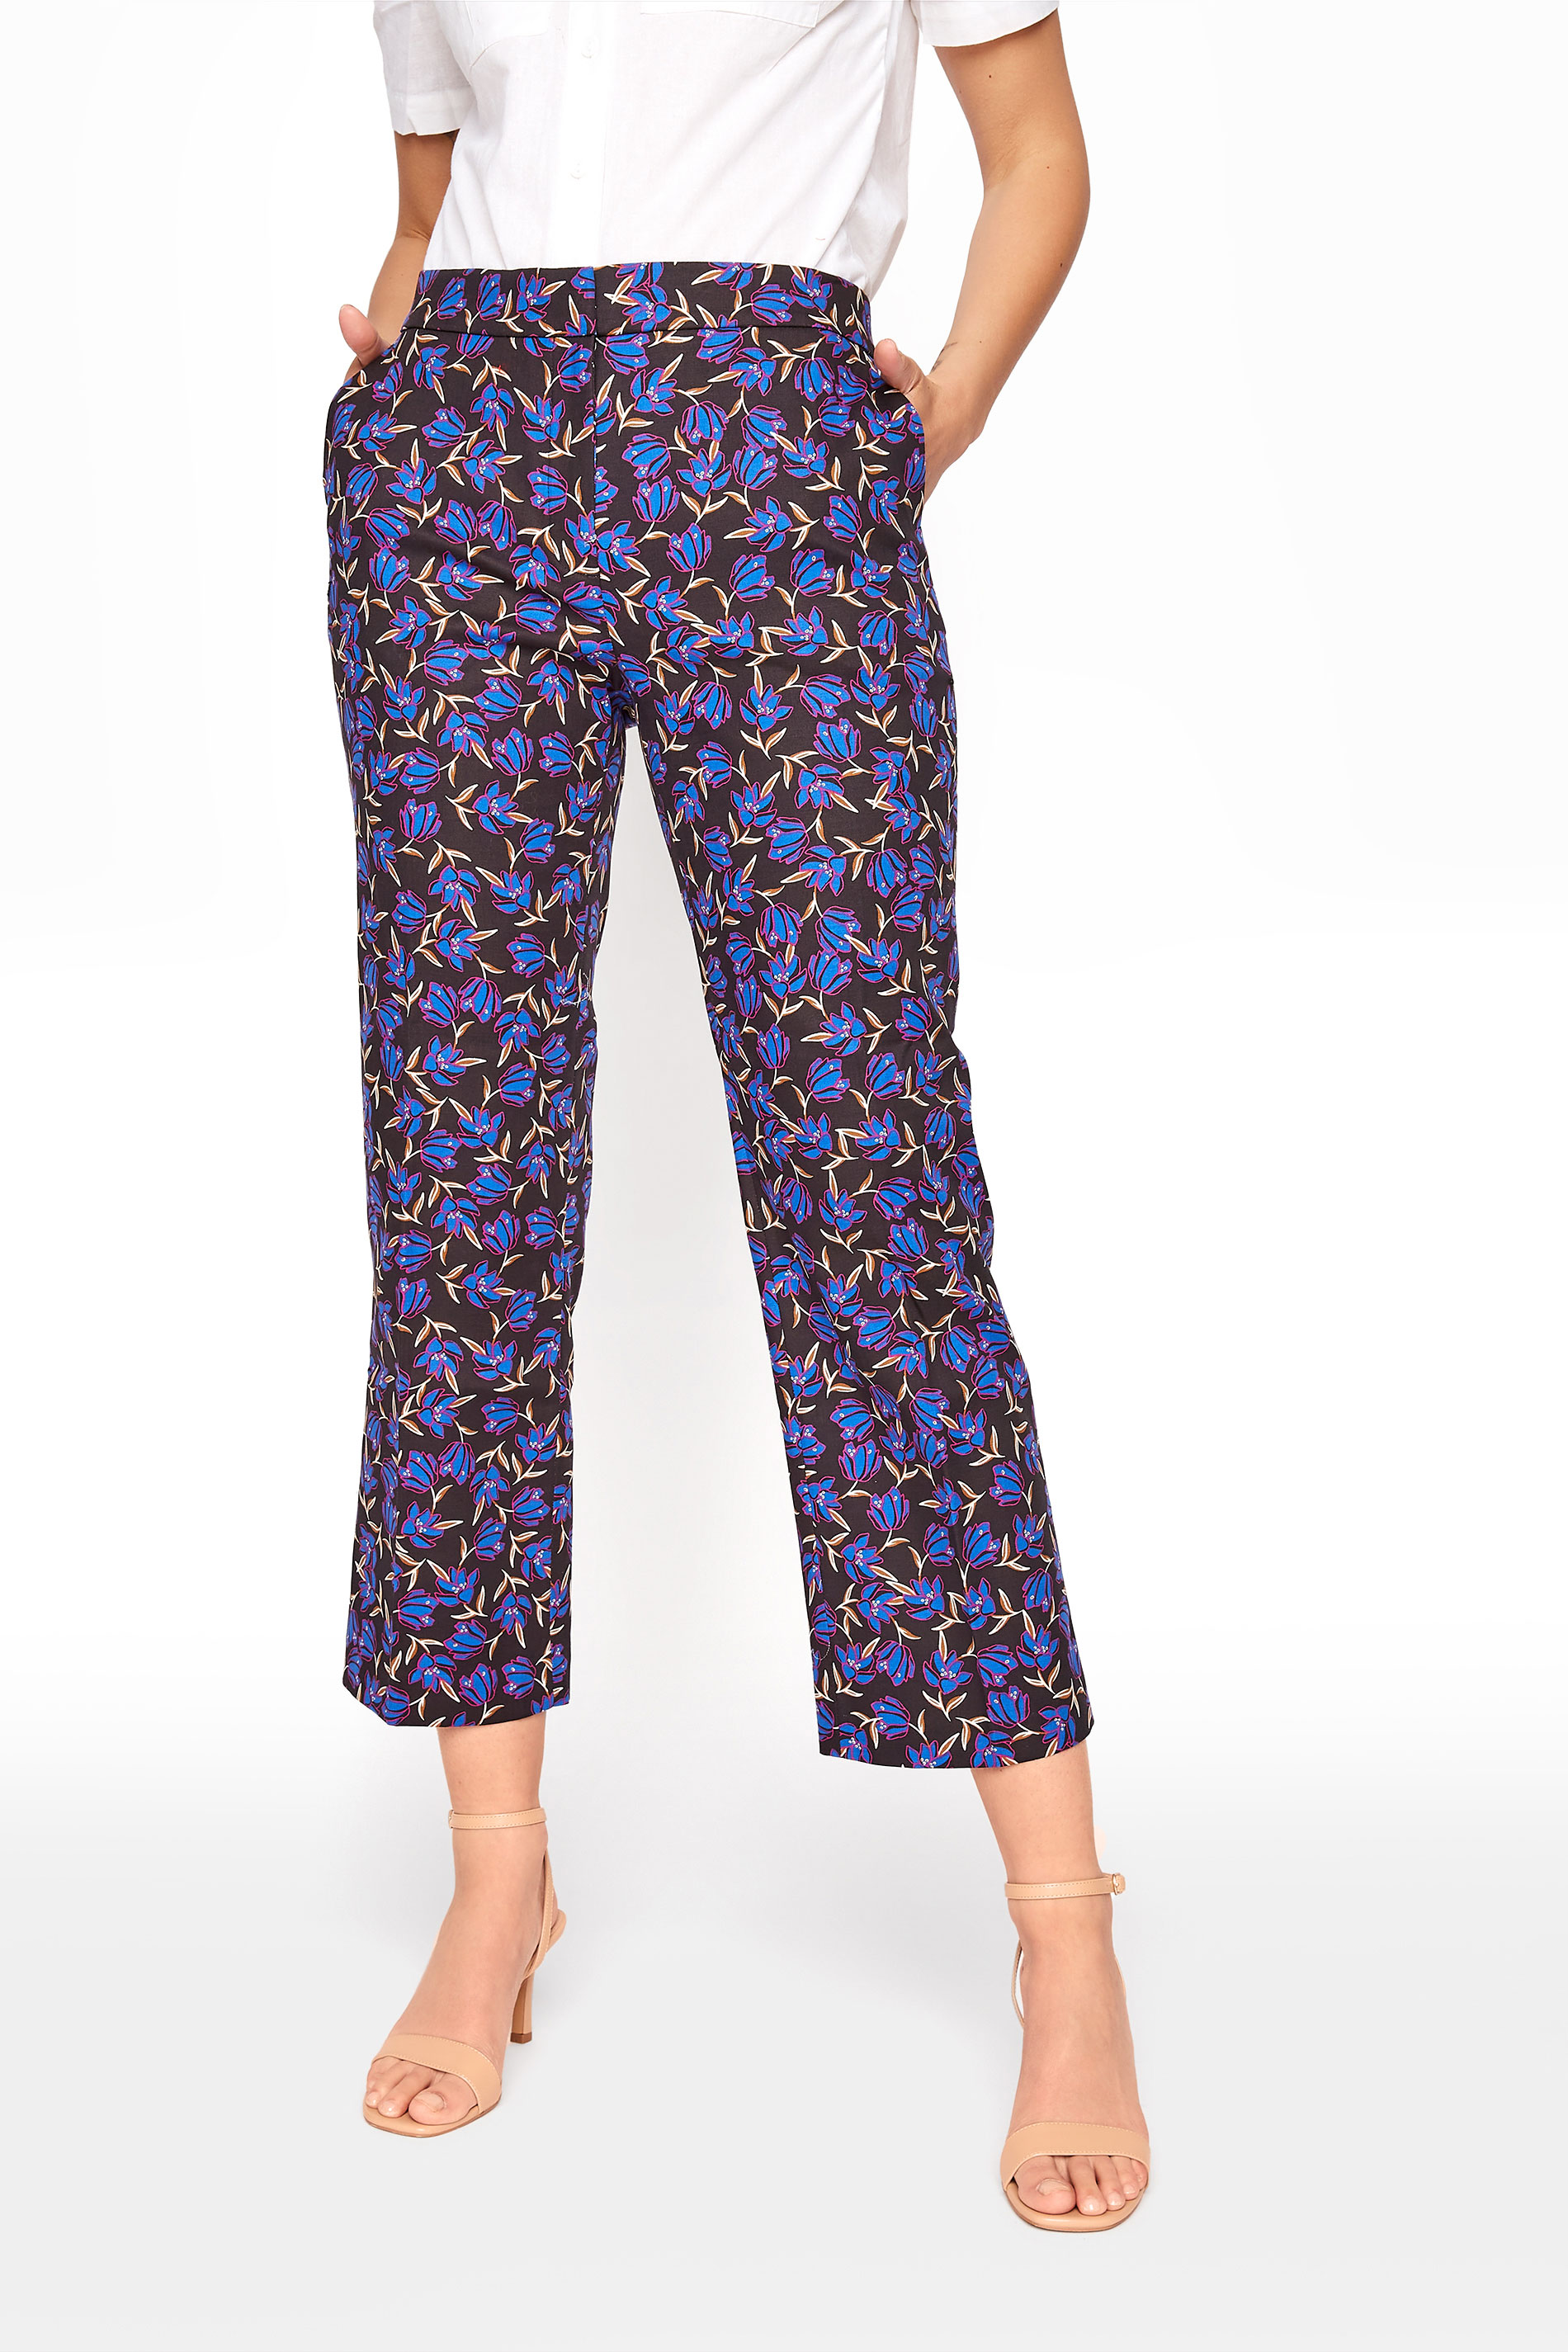 Purple Floral Print Cotton Sateen Ankle Grazer Trousers | Long Tall Sally